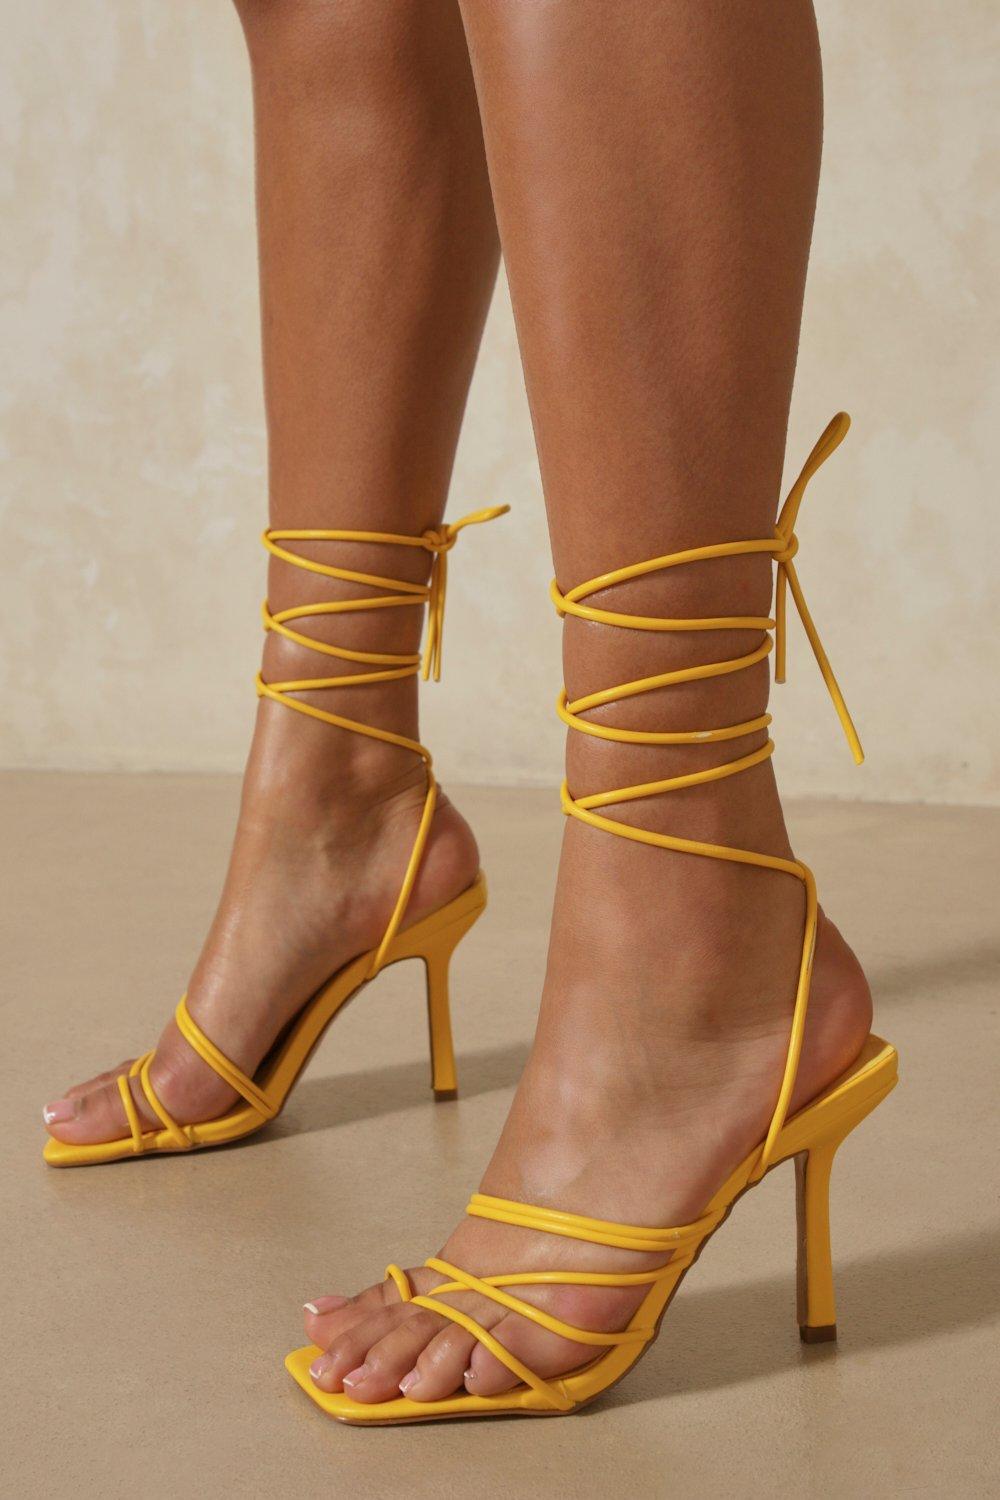 Christian Louboutin Red Sole Ribbon Ankle-wrap Stiletto Sandals in Yellow |  Lyst